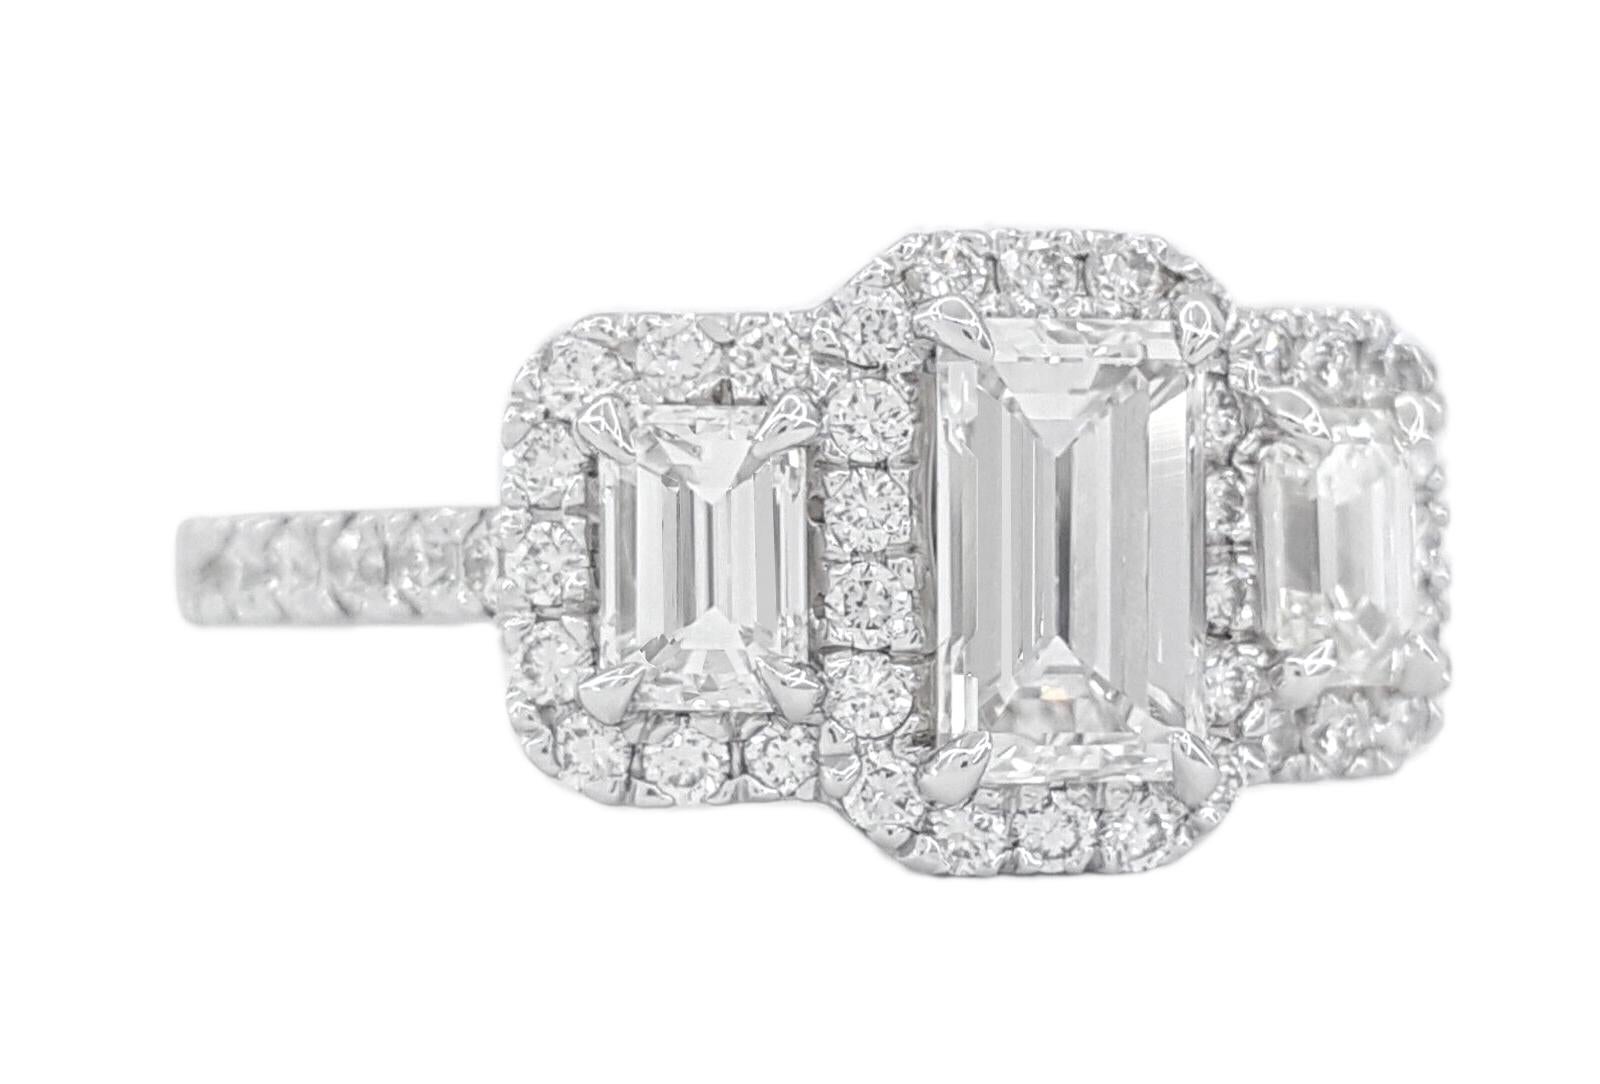 Three Stone Emerald Cut Diamond HaloEngagement Ring in 14k White Gold.



The ring weighs 3.6 grams, size 6, the center stone is a Natural Emerald Cut Diamond weighing 0.71 ct, F in color, SI1 in clarity, measurements of the center stone are 6.60 x